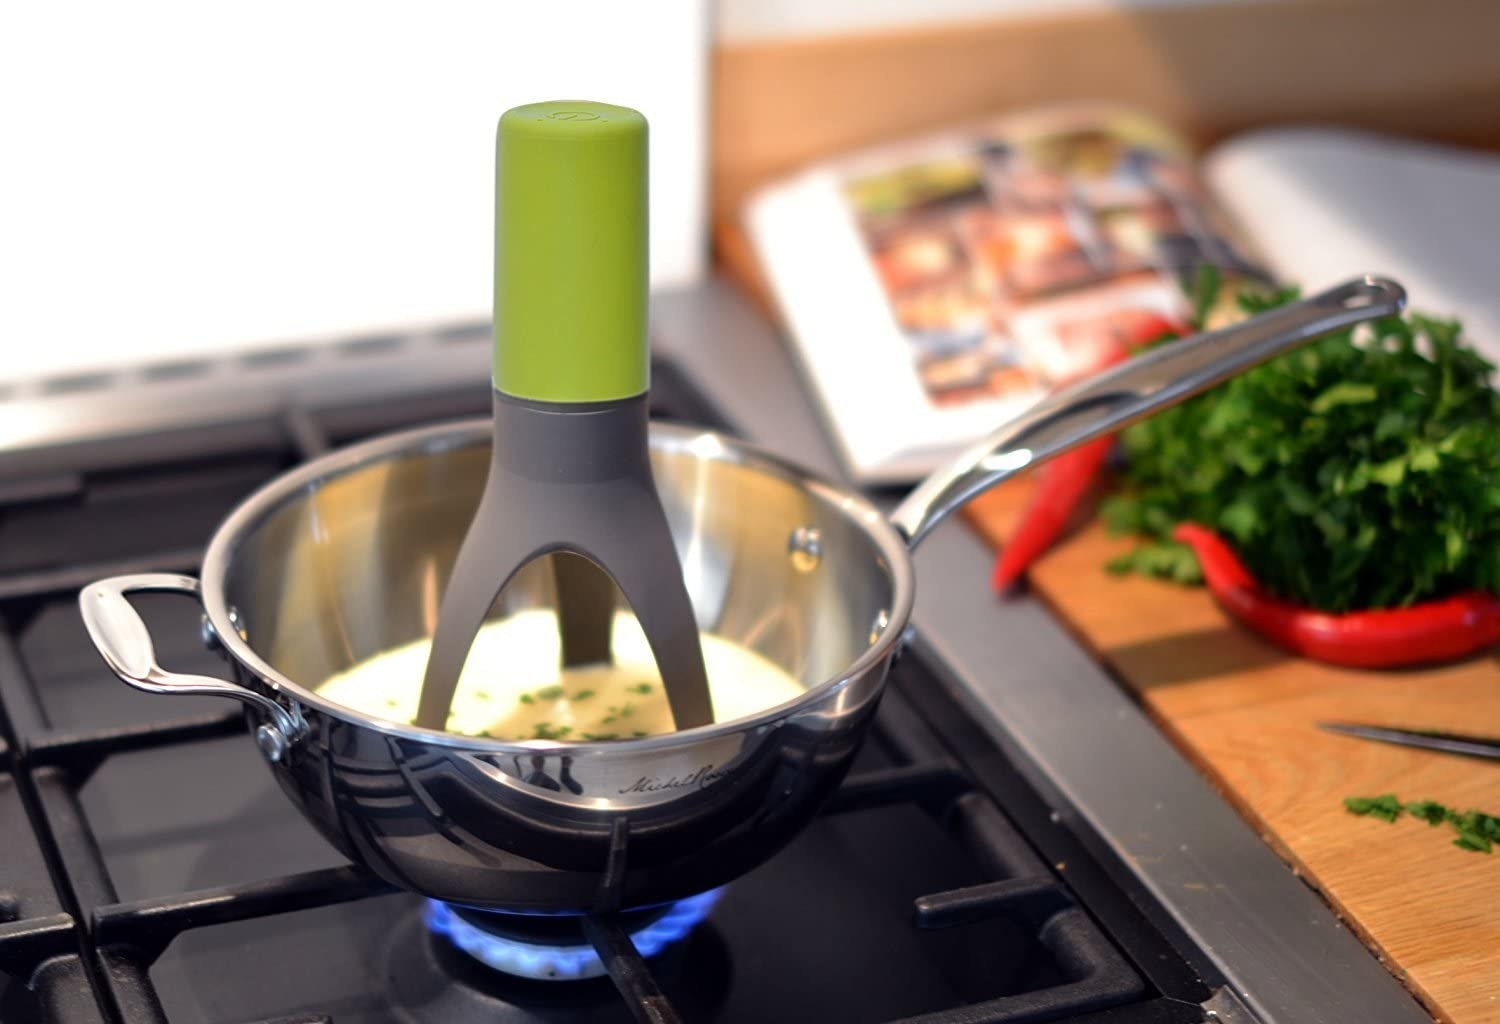 An automatic stirrer stirring eggs in a pan